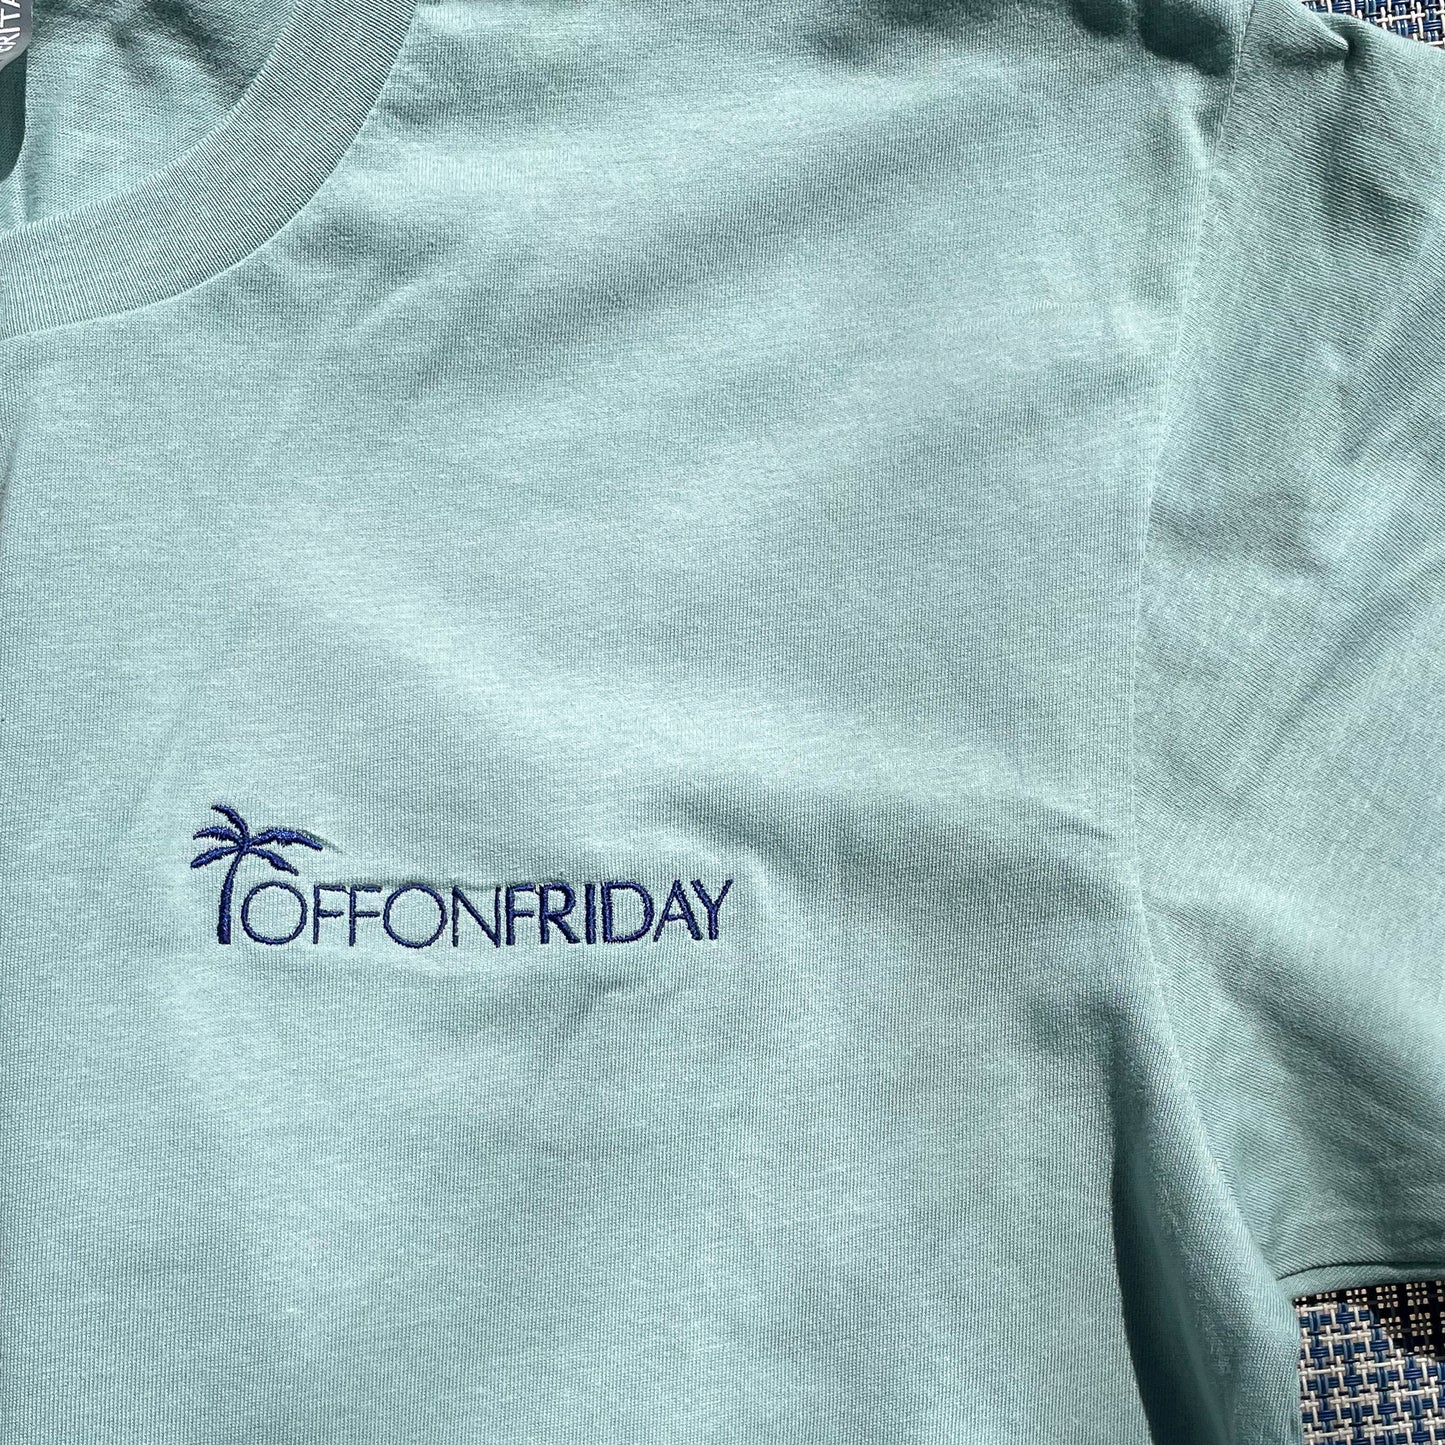 OFF ON FRIDAY T-SHIRT